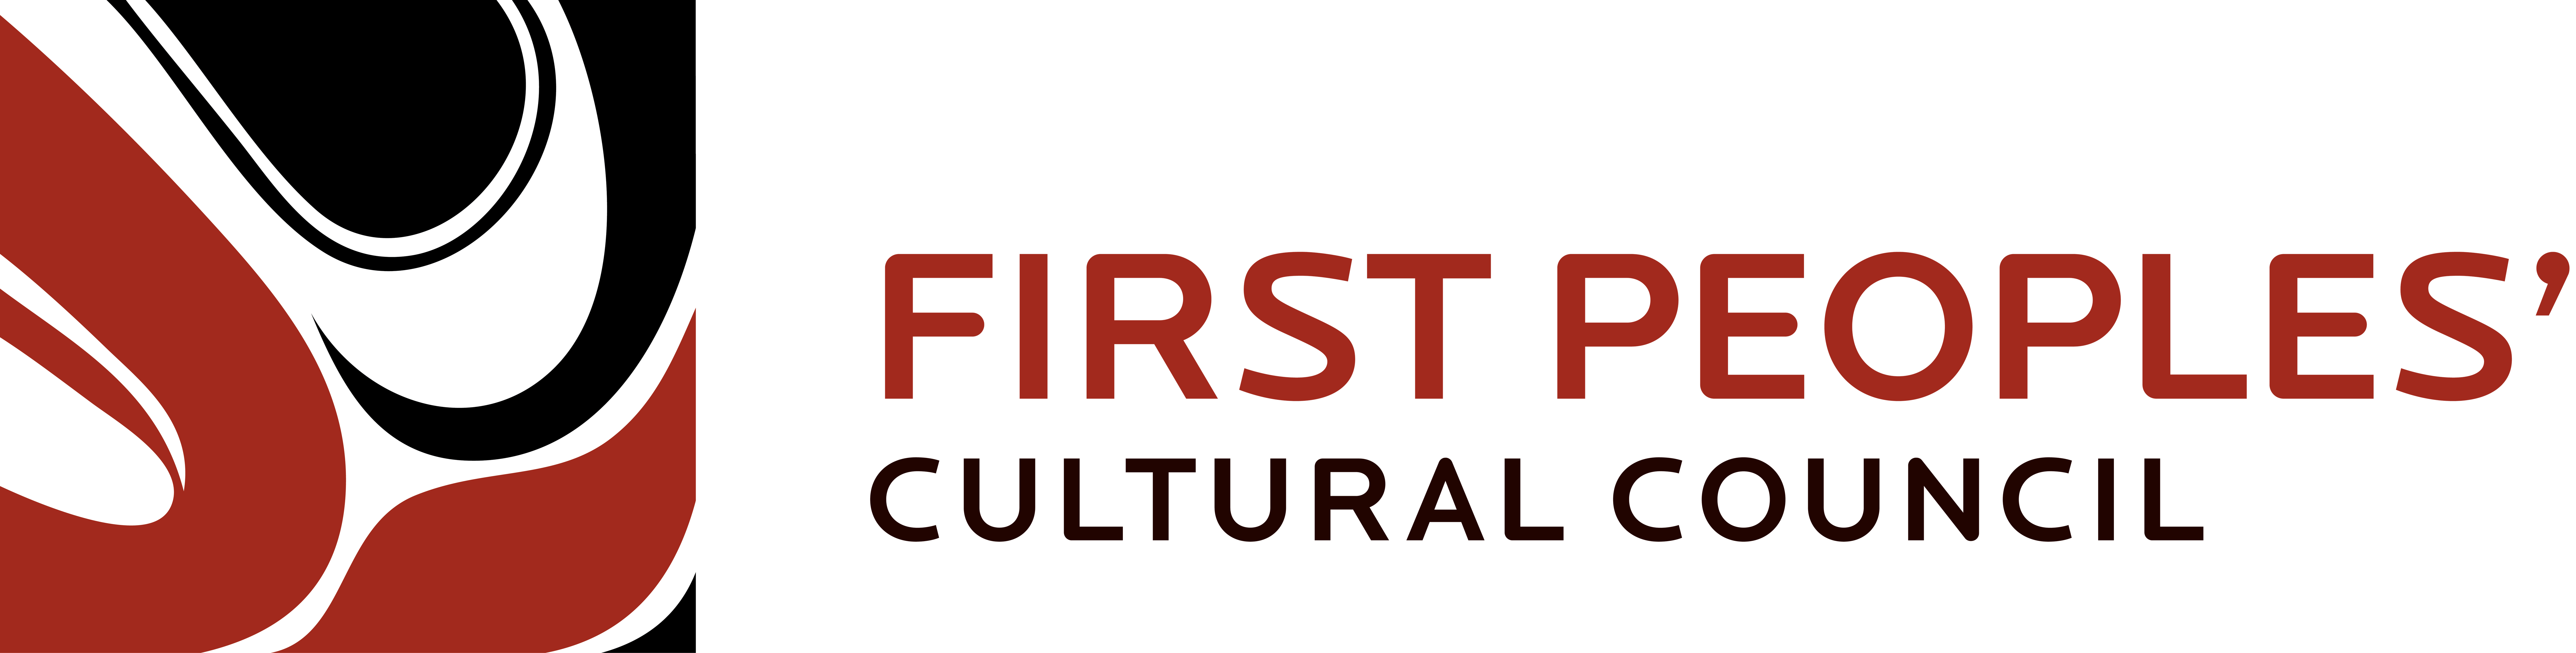 First People's Cultural Council